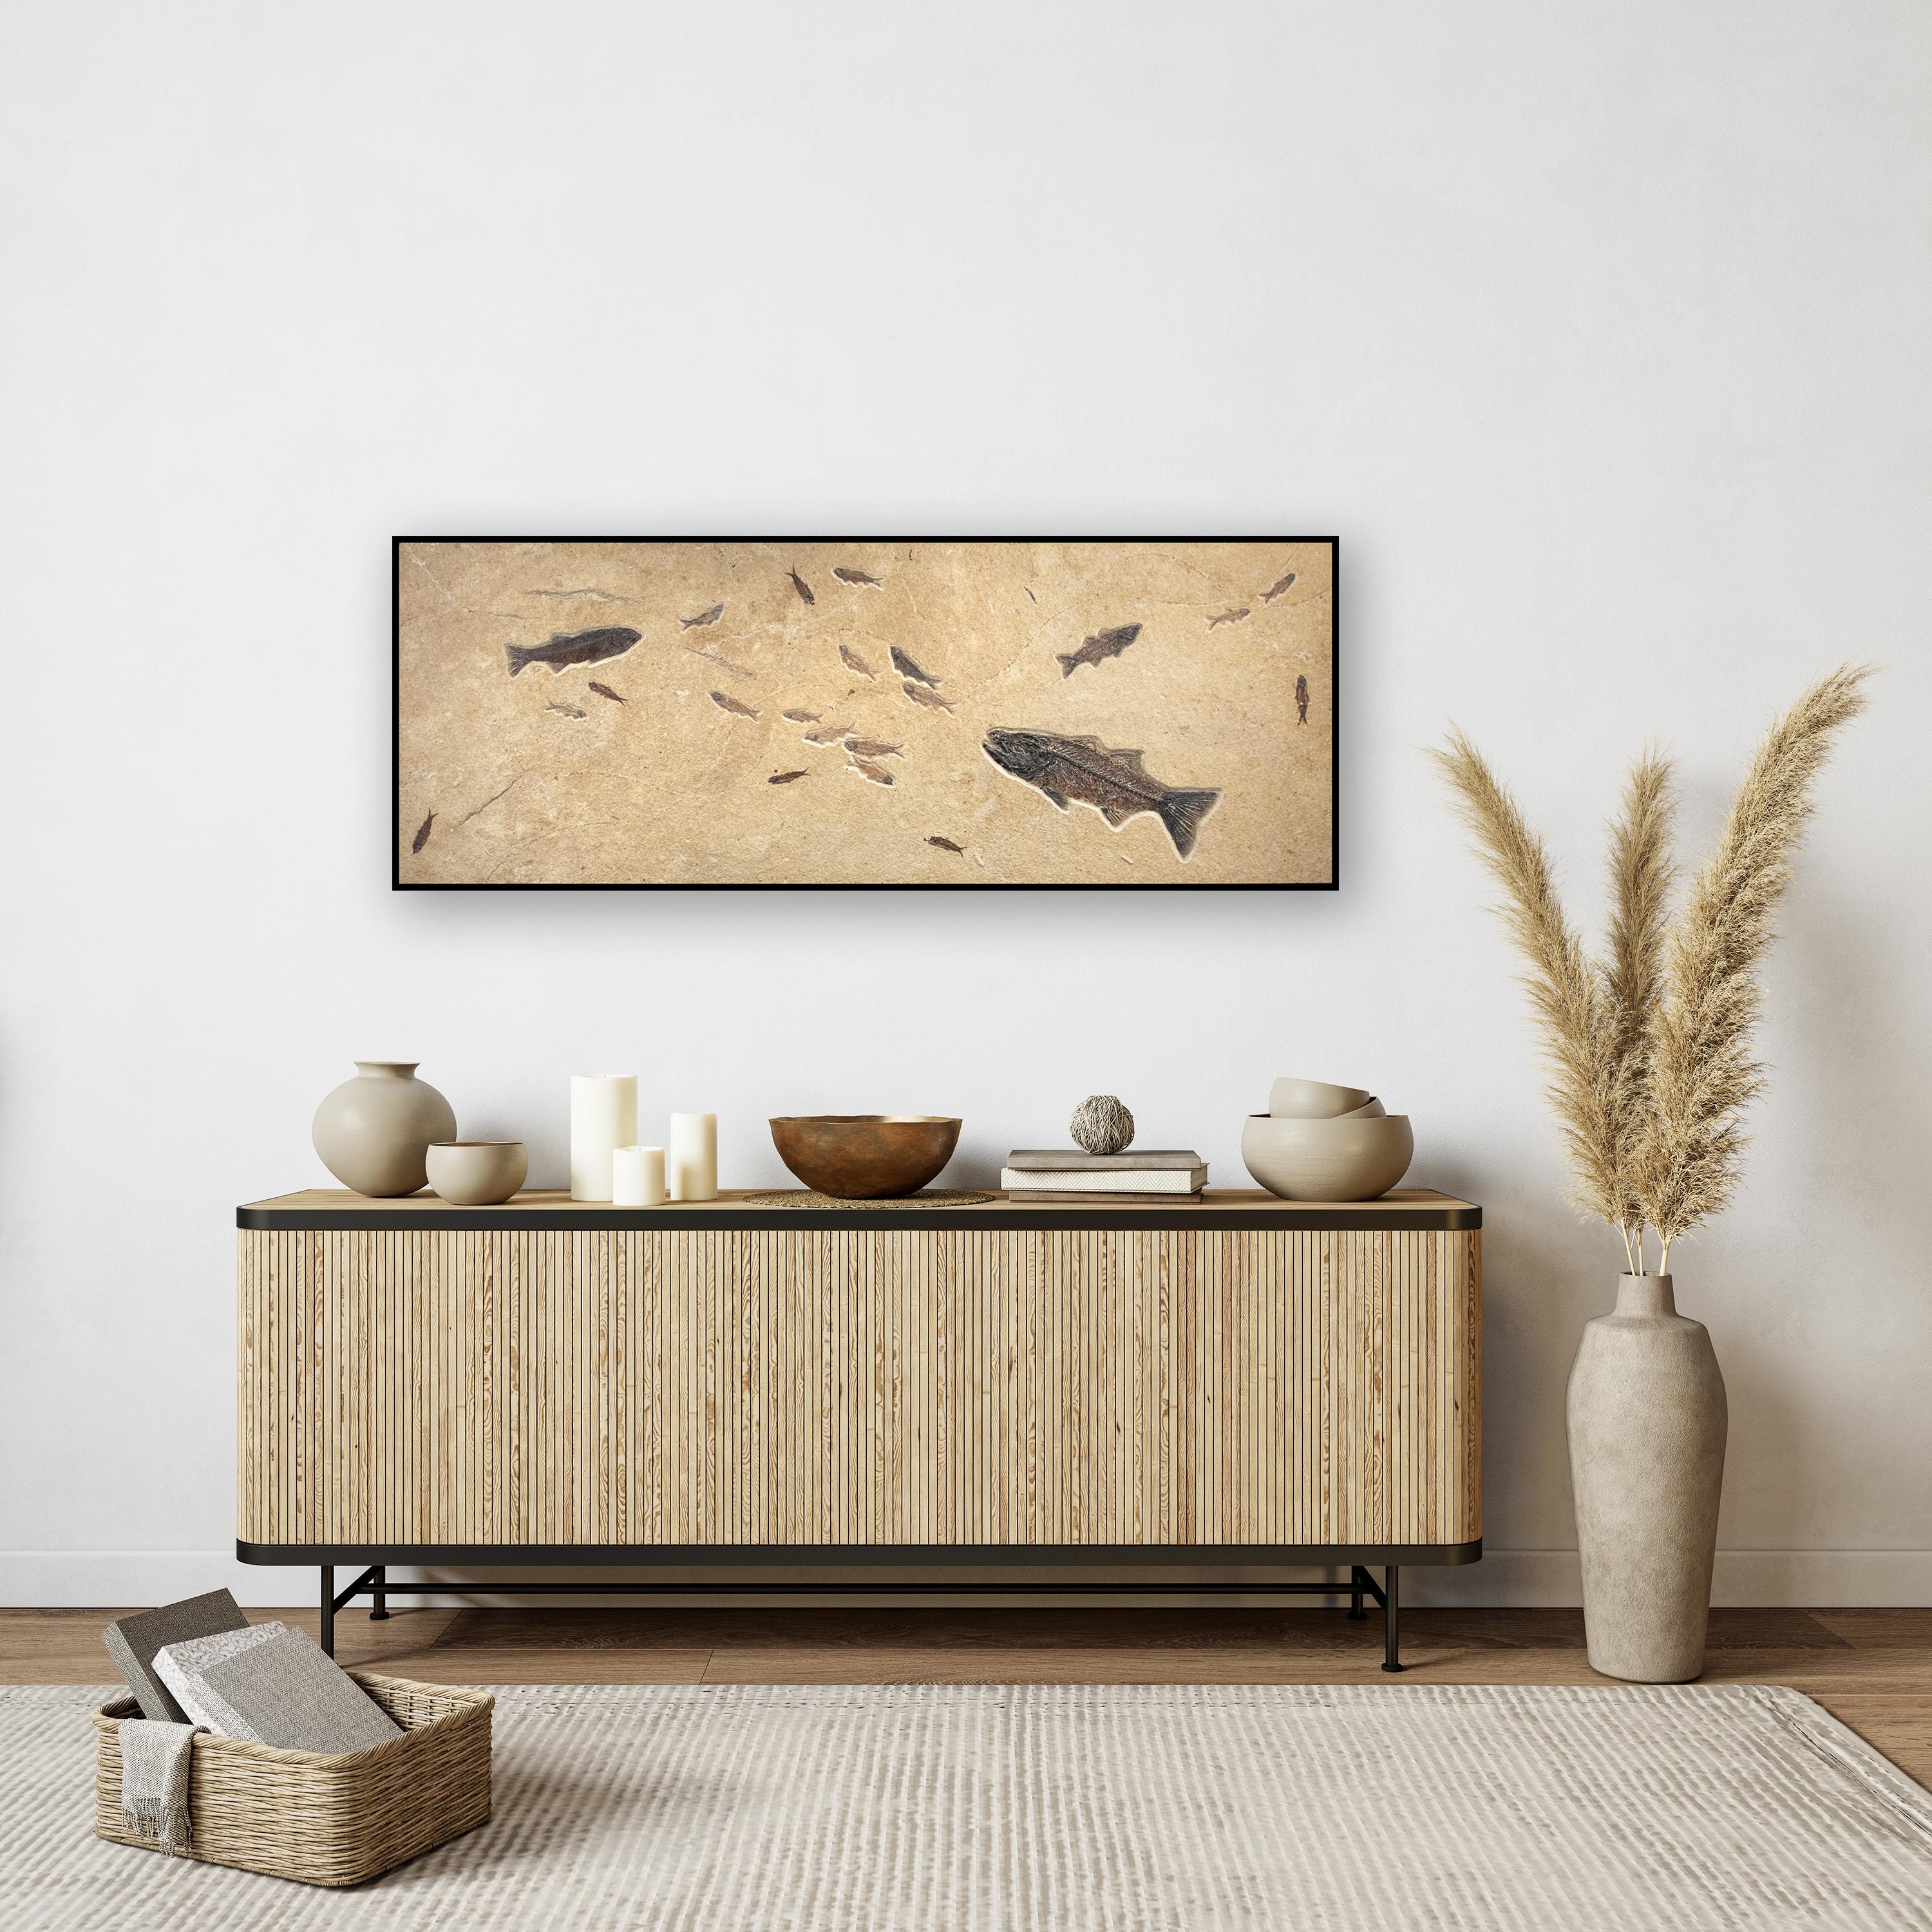 This exquisite and unique fossil mural features three Mioplosus labracoides and nineteen Knightia eocaena. These fish are all Eocene era fossils dating back about 50 million years. This sculptural fossil mural also features beautifully preserved